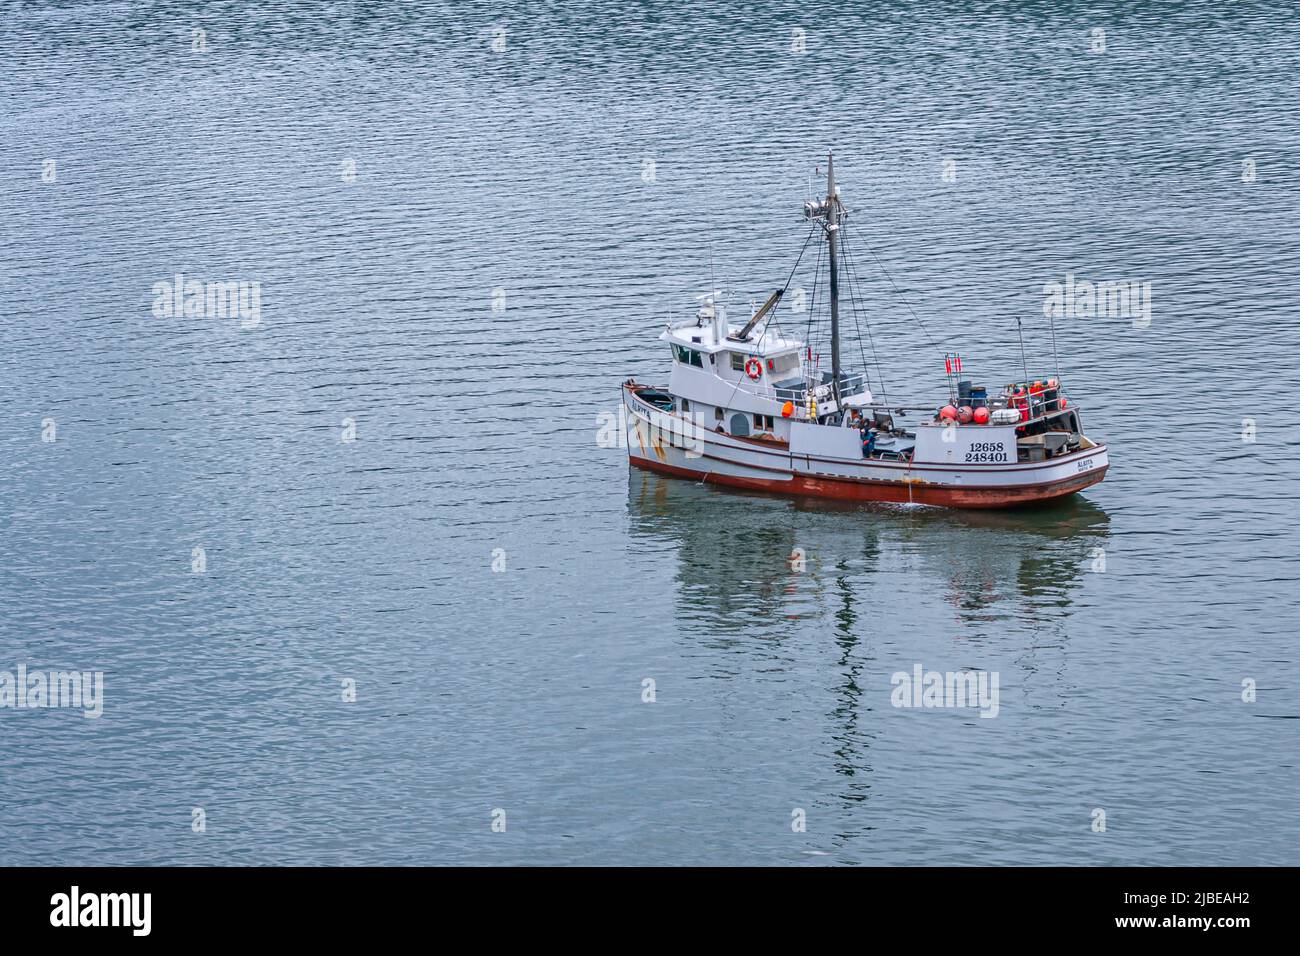 Juneau, Alaska, USA - July 19, 2011: Closeup of red-white Alrita fishing vessel out of Seattle on gray-blueish Gastineau Channel water. Portective bal Stock Photo